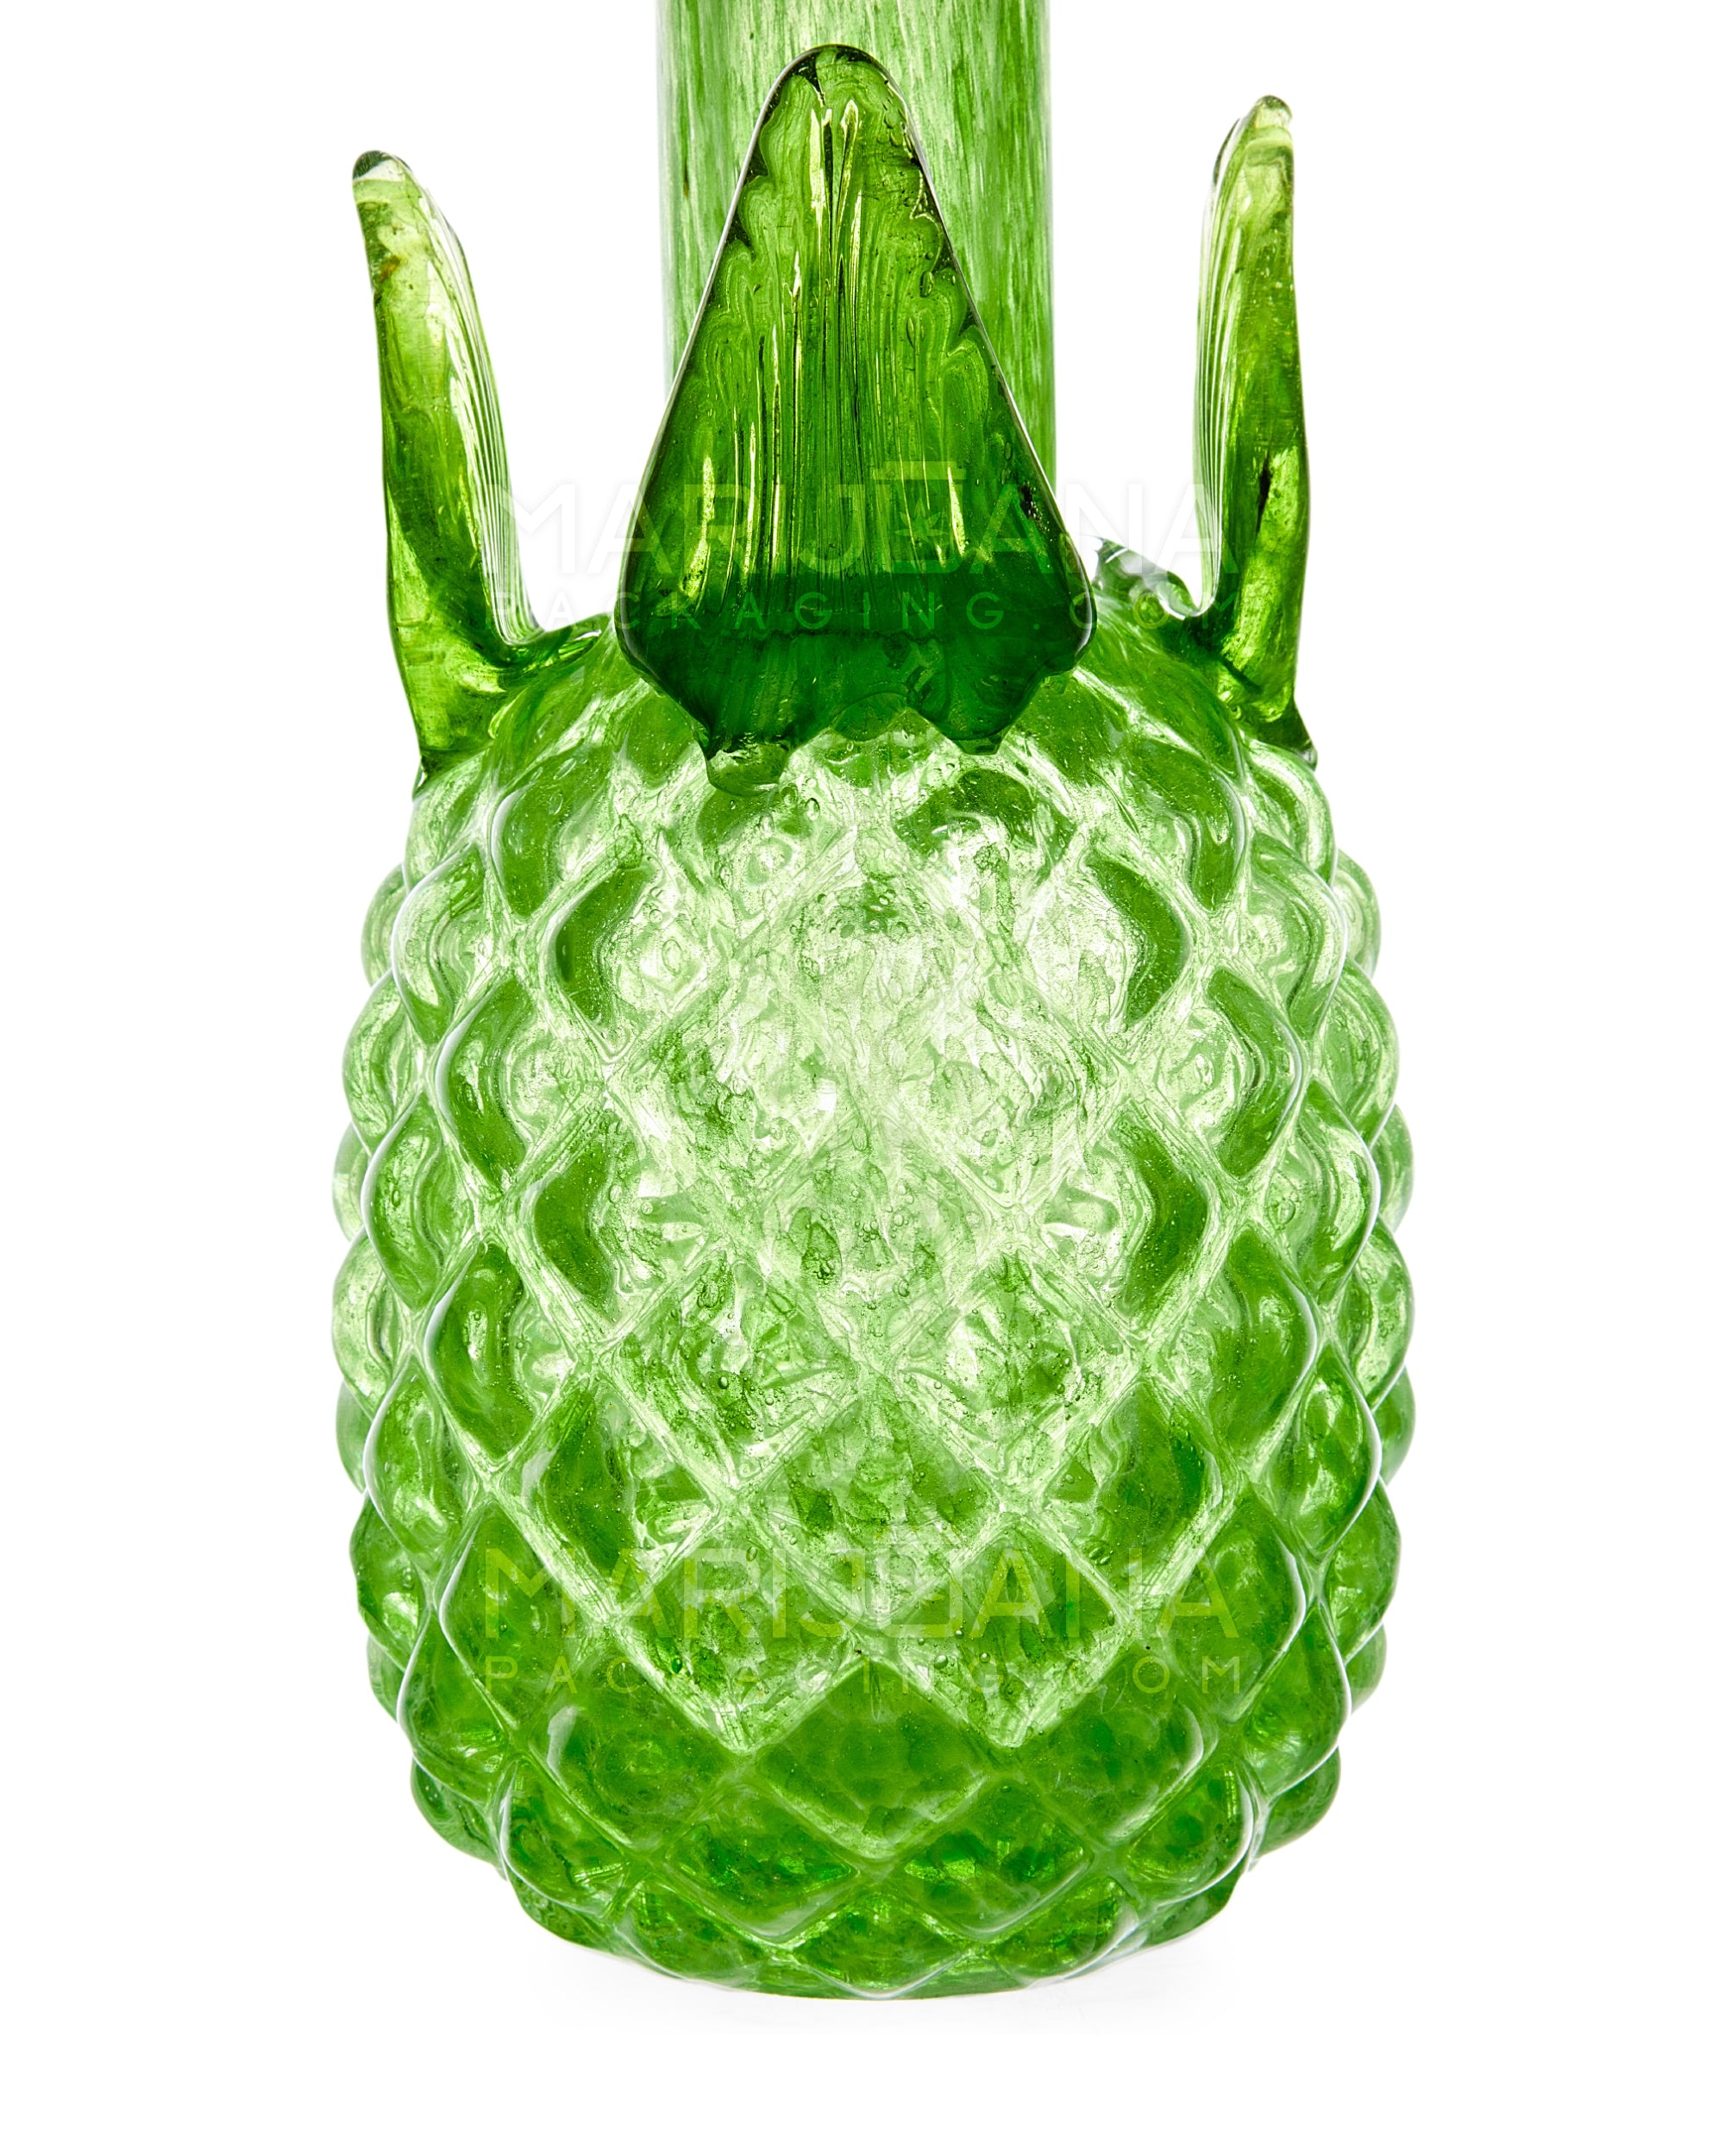 Straight Neck Color Pull Pineapple Glass Water Pipe | 14in Tall - 14mm Bowl - Green